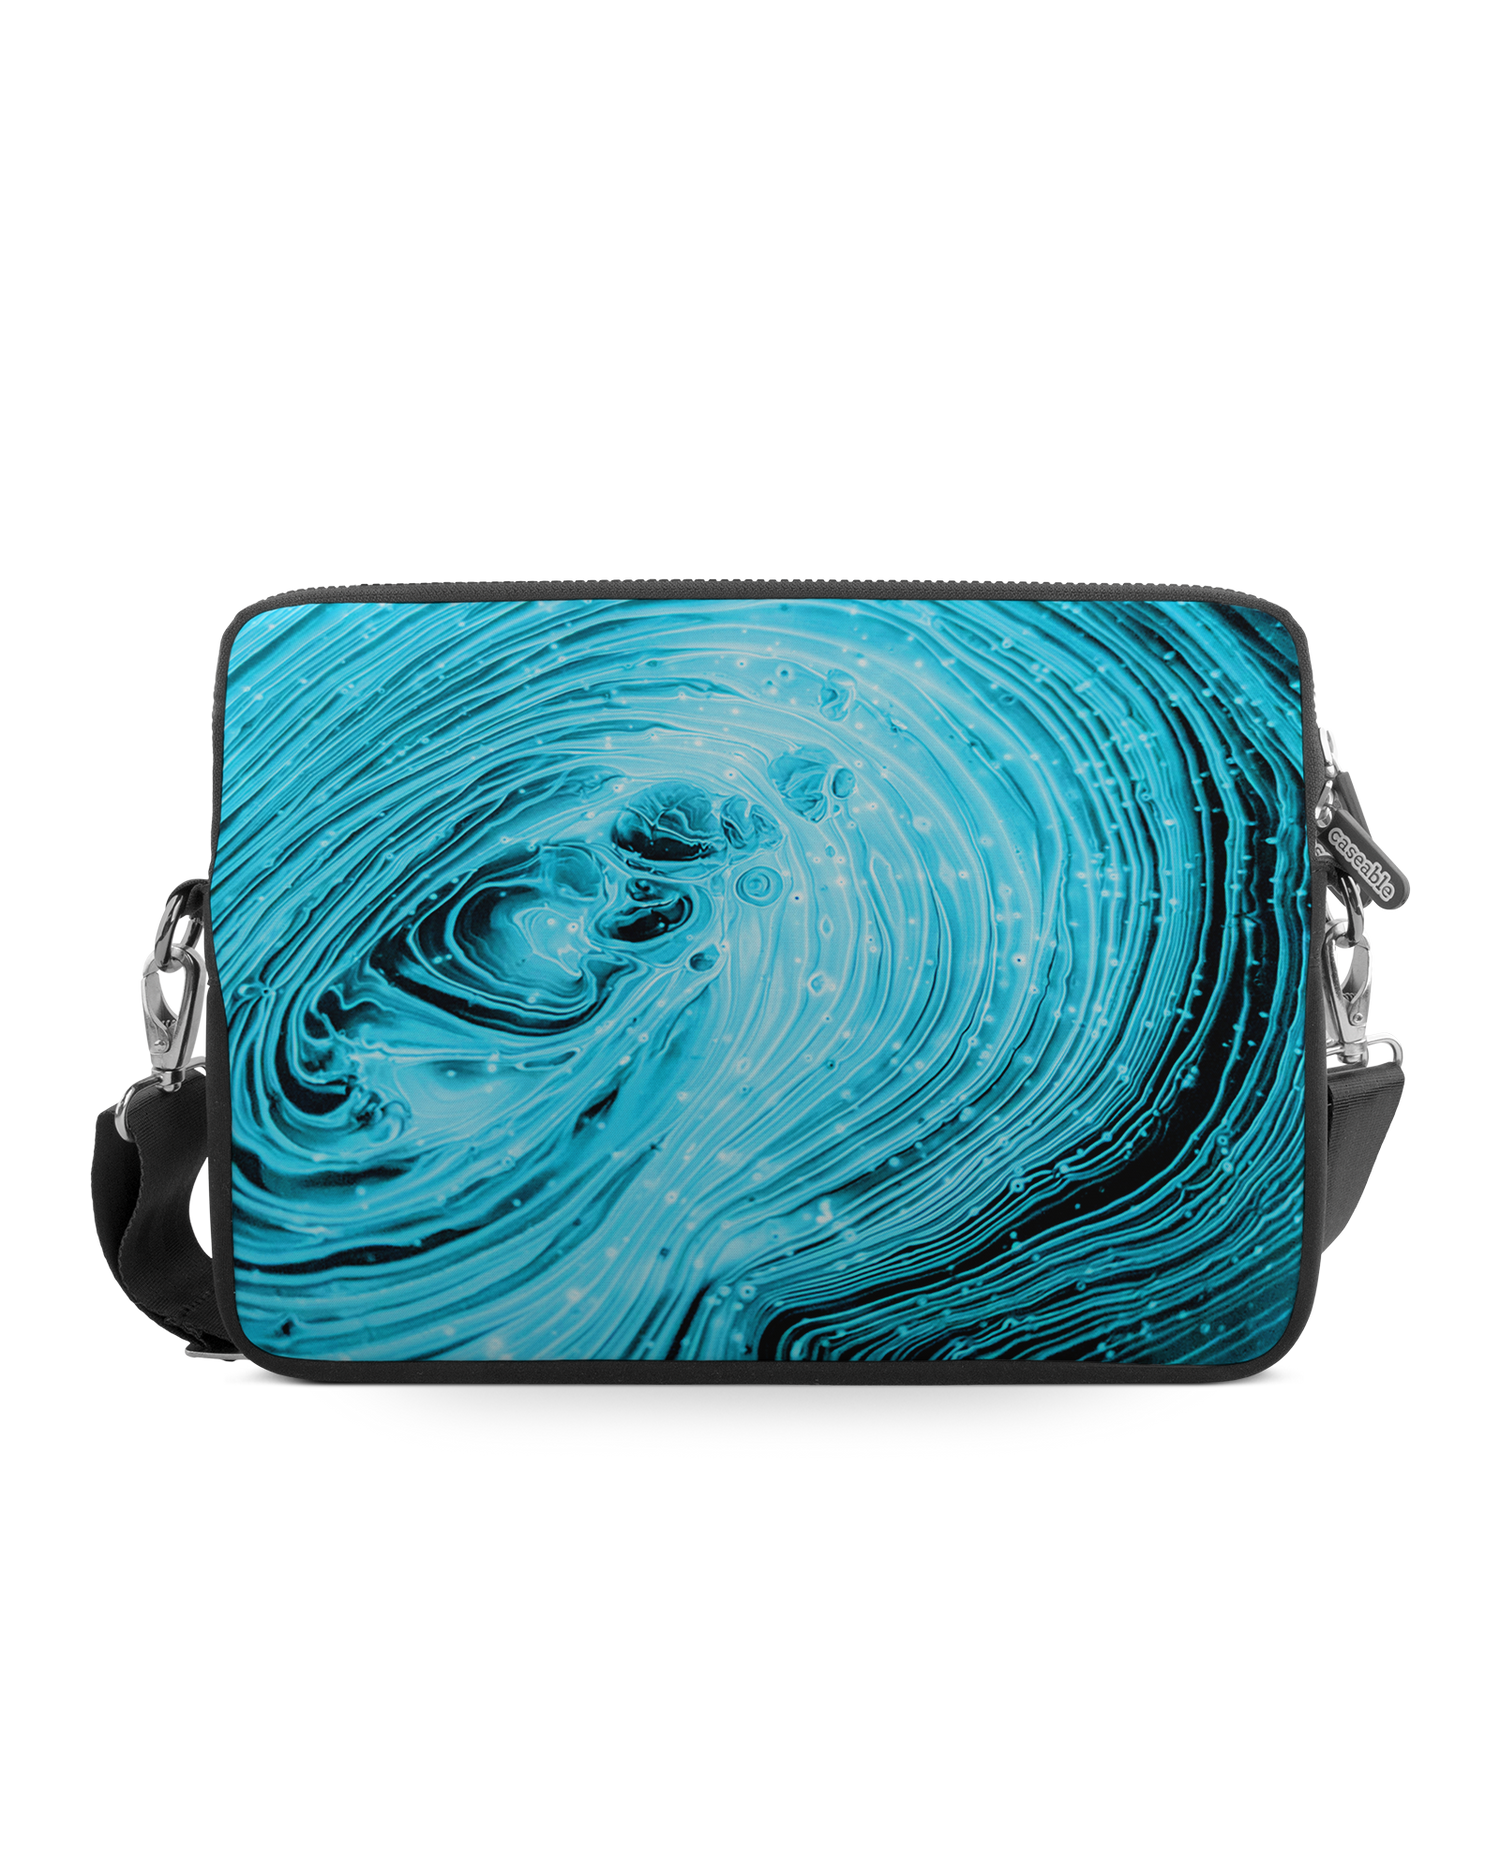 Turquoise Ripples Premium Laptop Bag 13-14 inch: Front View